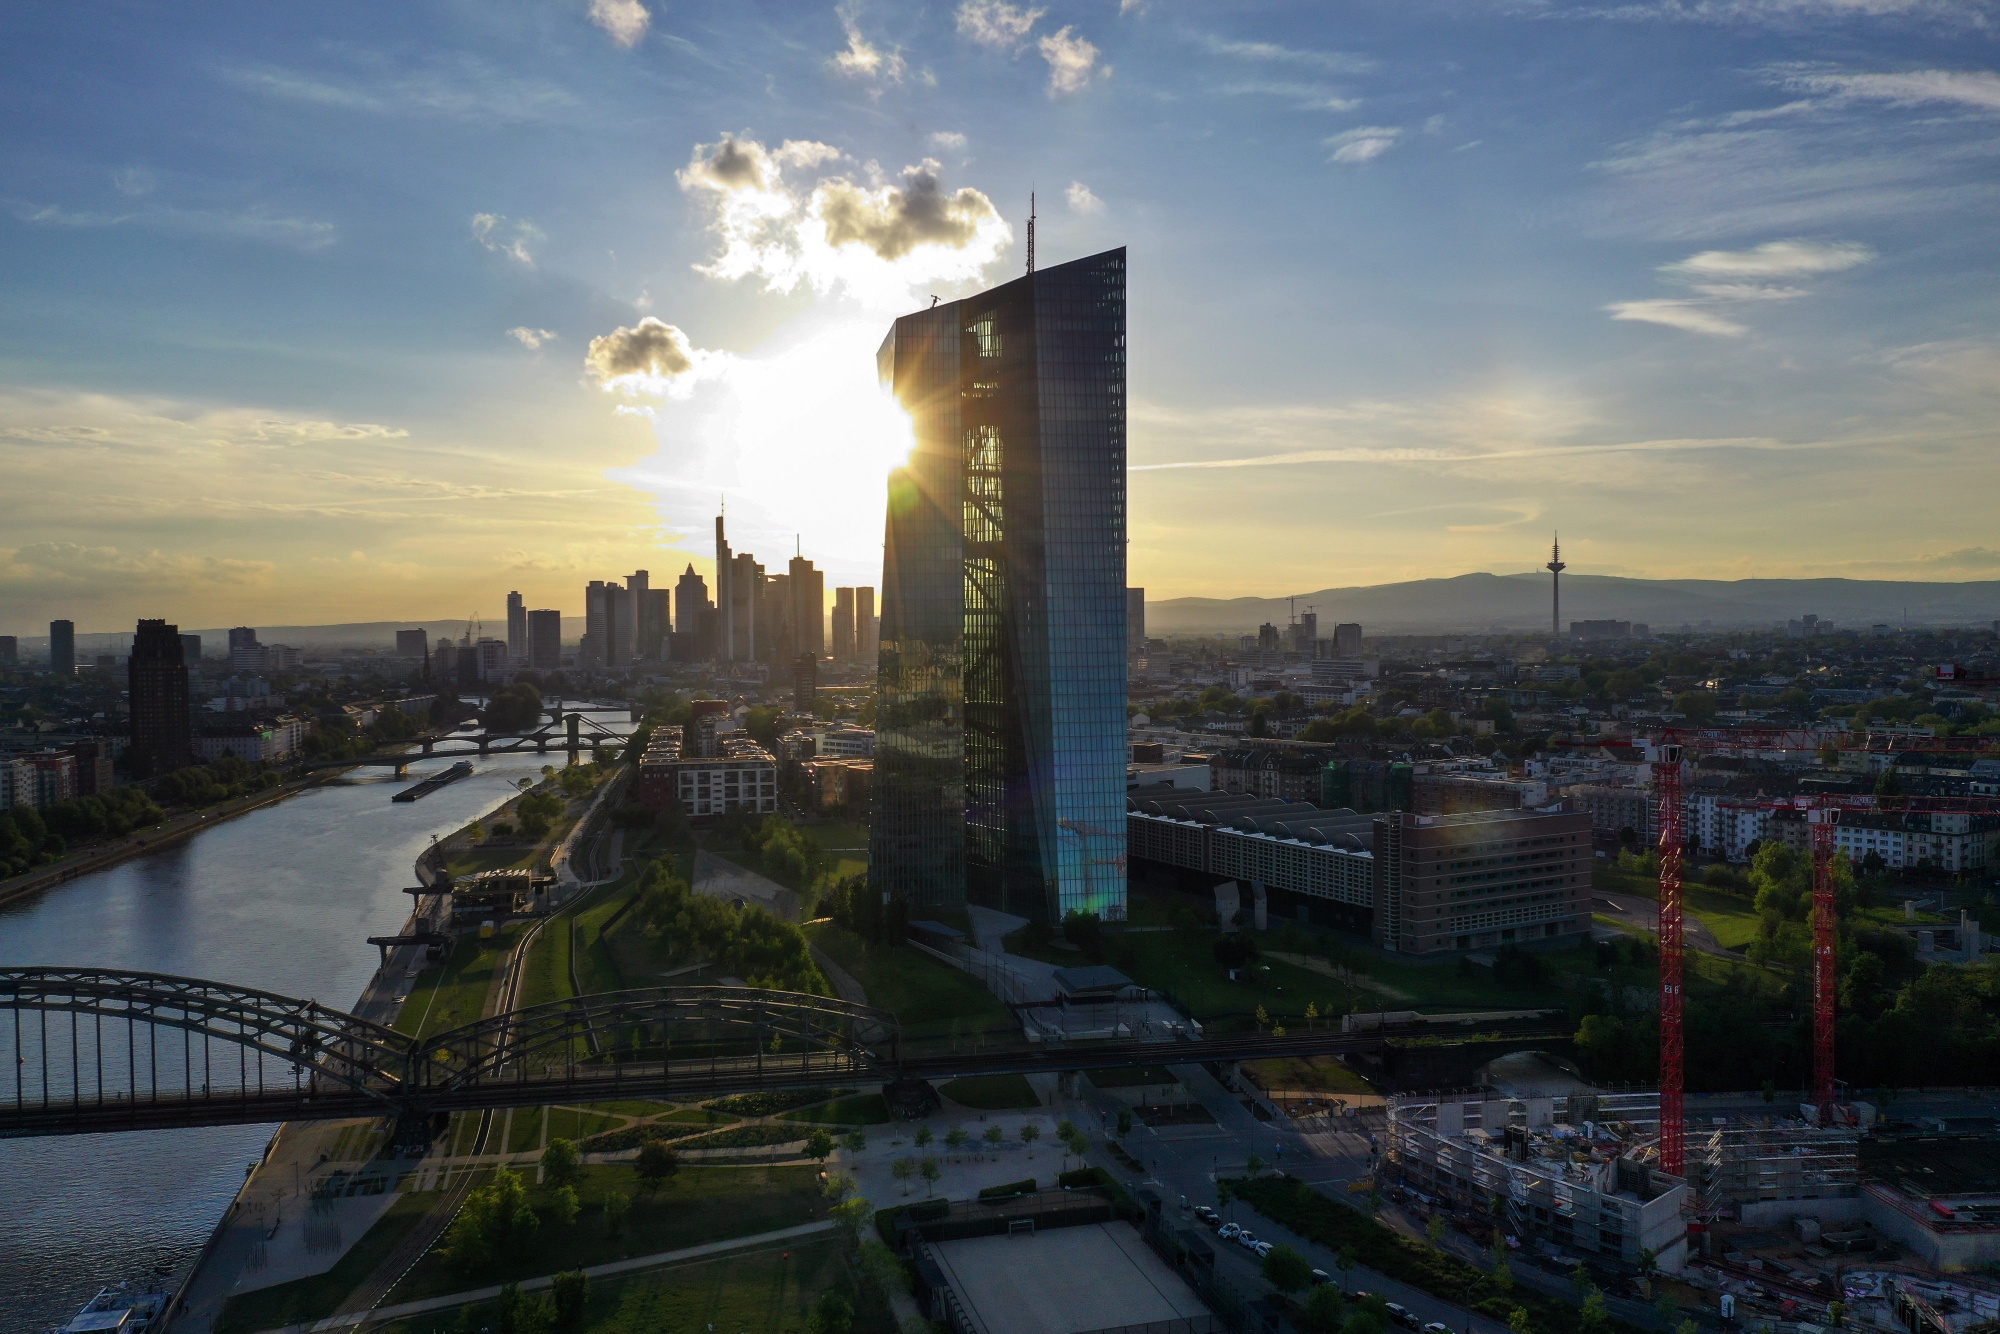 The setting sun reflects off the European Central Bank headquarters&nbsp;in Frankfurt.